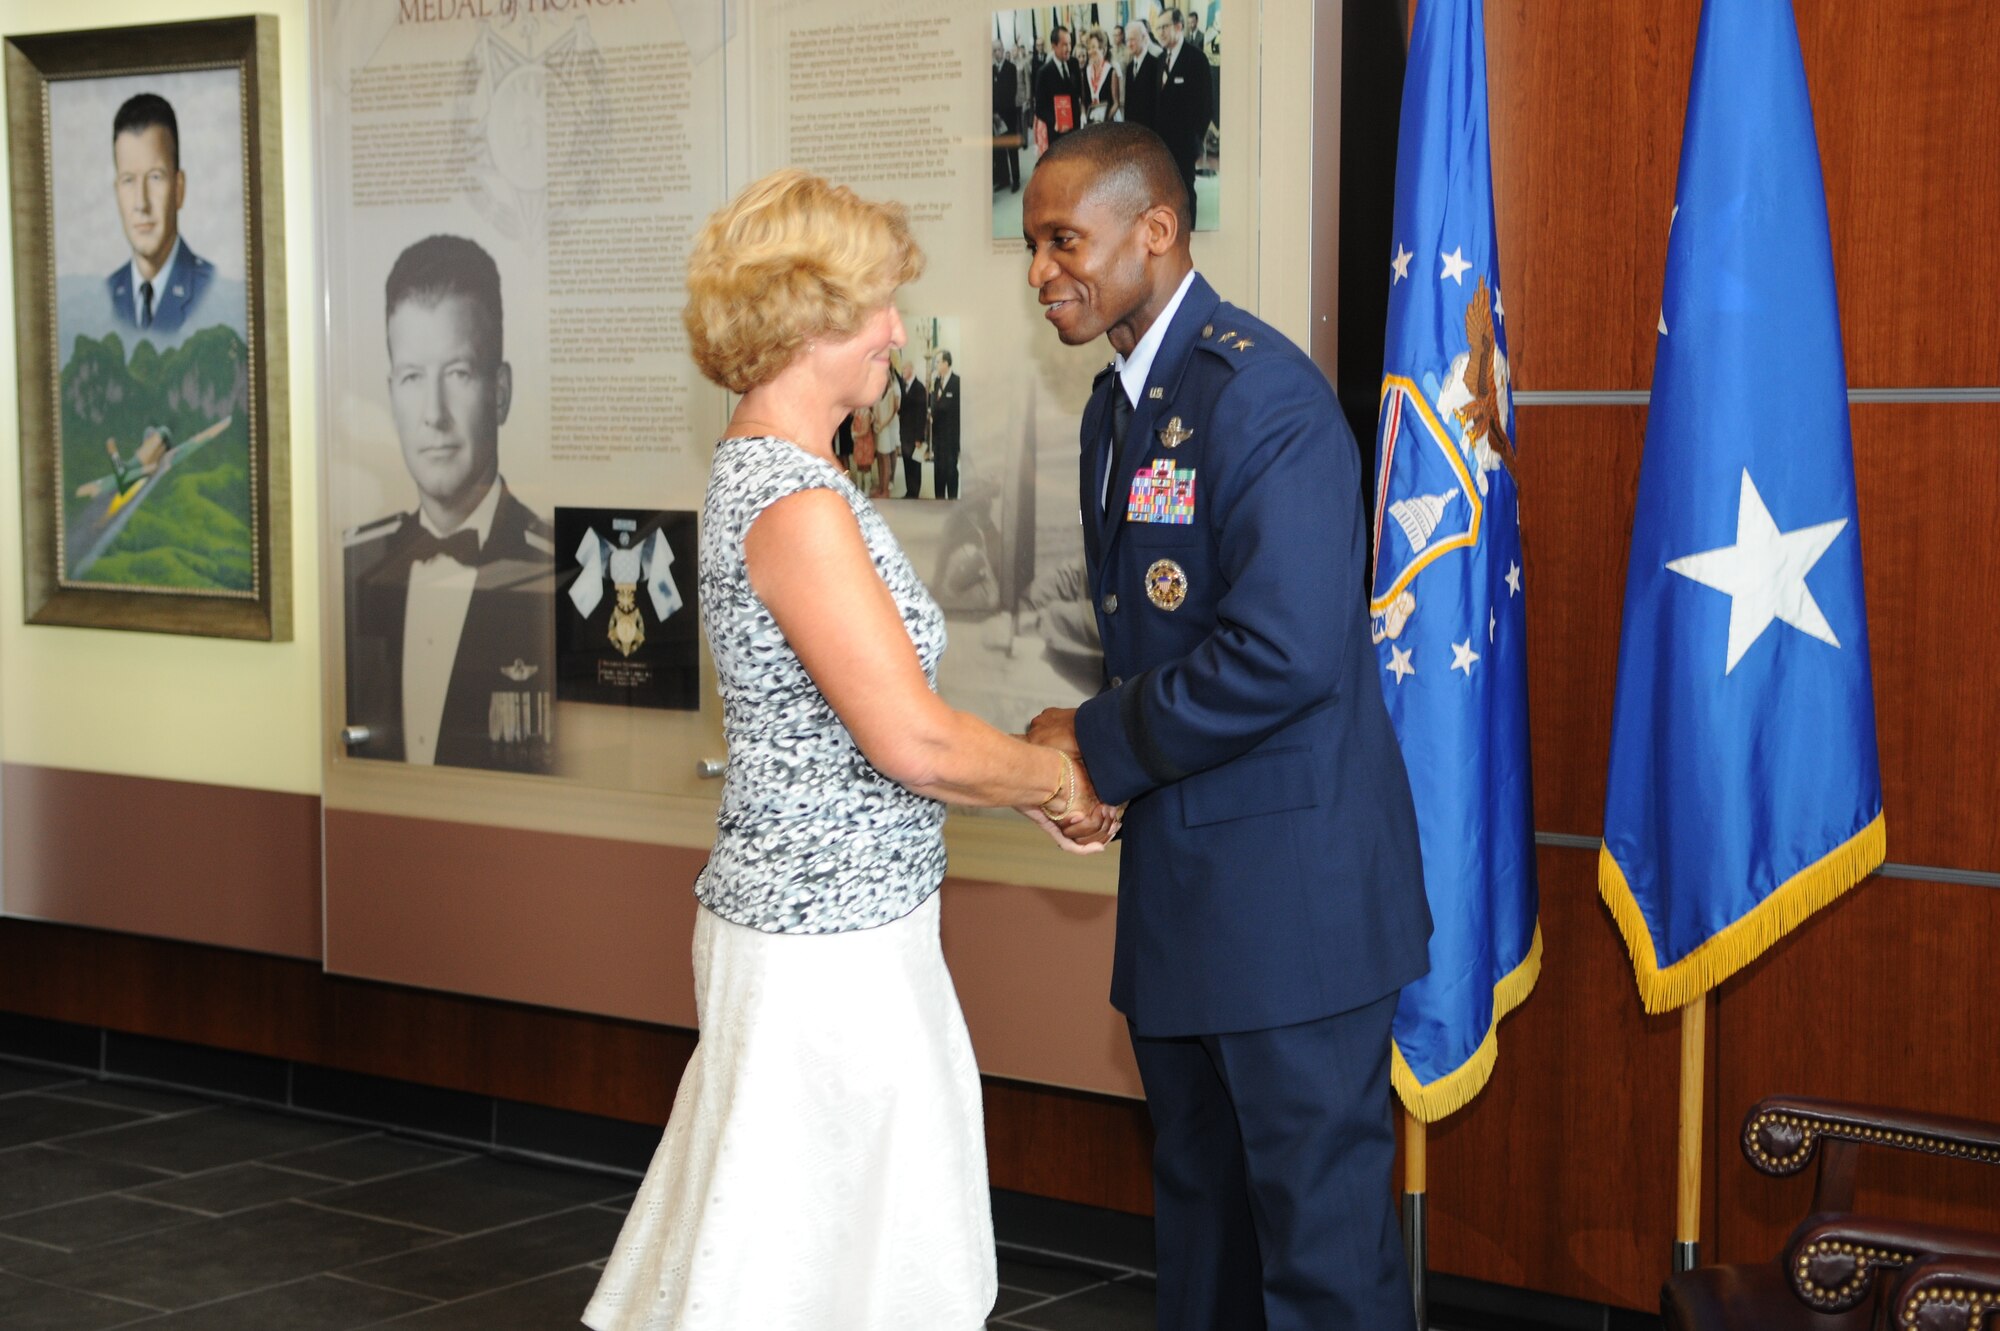 Anne Gilfillan, first daughter of Col. William A. Jones III, thanks Maj. Gen. Darren McDew, Air Force District of Washington commander, after he spoke at a display dedication in the new William A. Jones III Building on July 28. The display honors the life and service of Medal of Honor recipient Col. William A. Jones III, a former air commando with the 602nd Special Operations Squadron and A-1 Sky Raider pilot during the Vietnam War. (U.S. Air Force photo/Staff Sgt. Kris Levasseur)